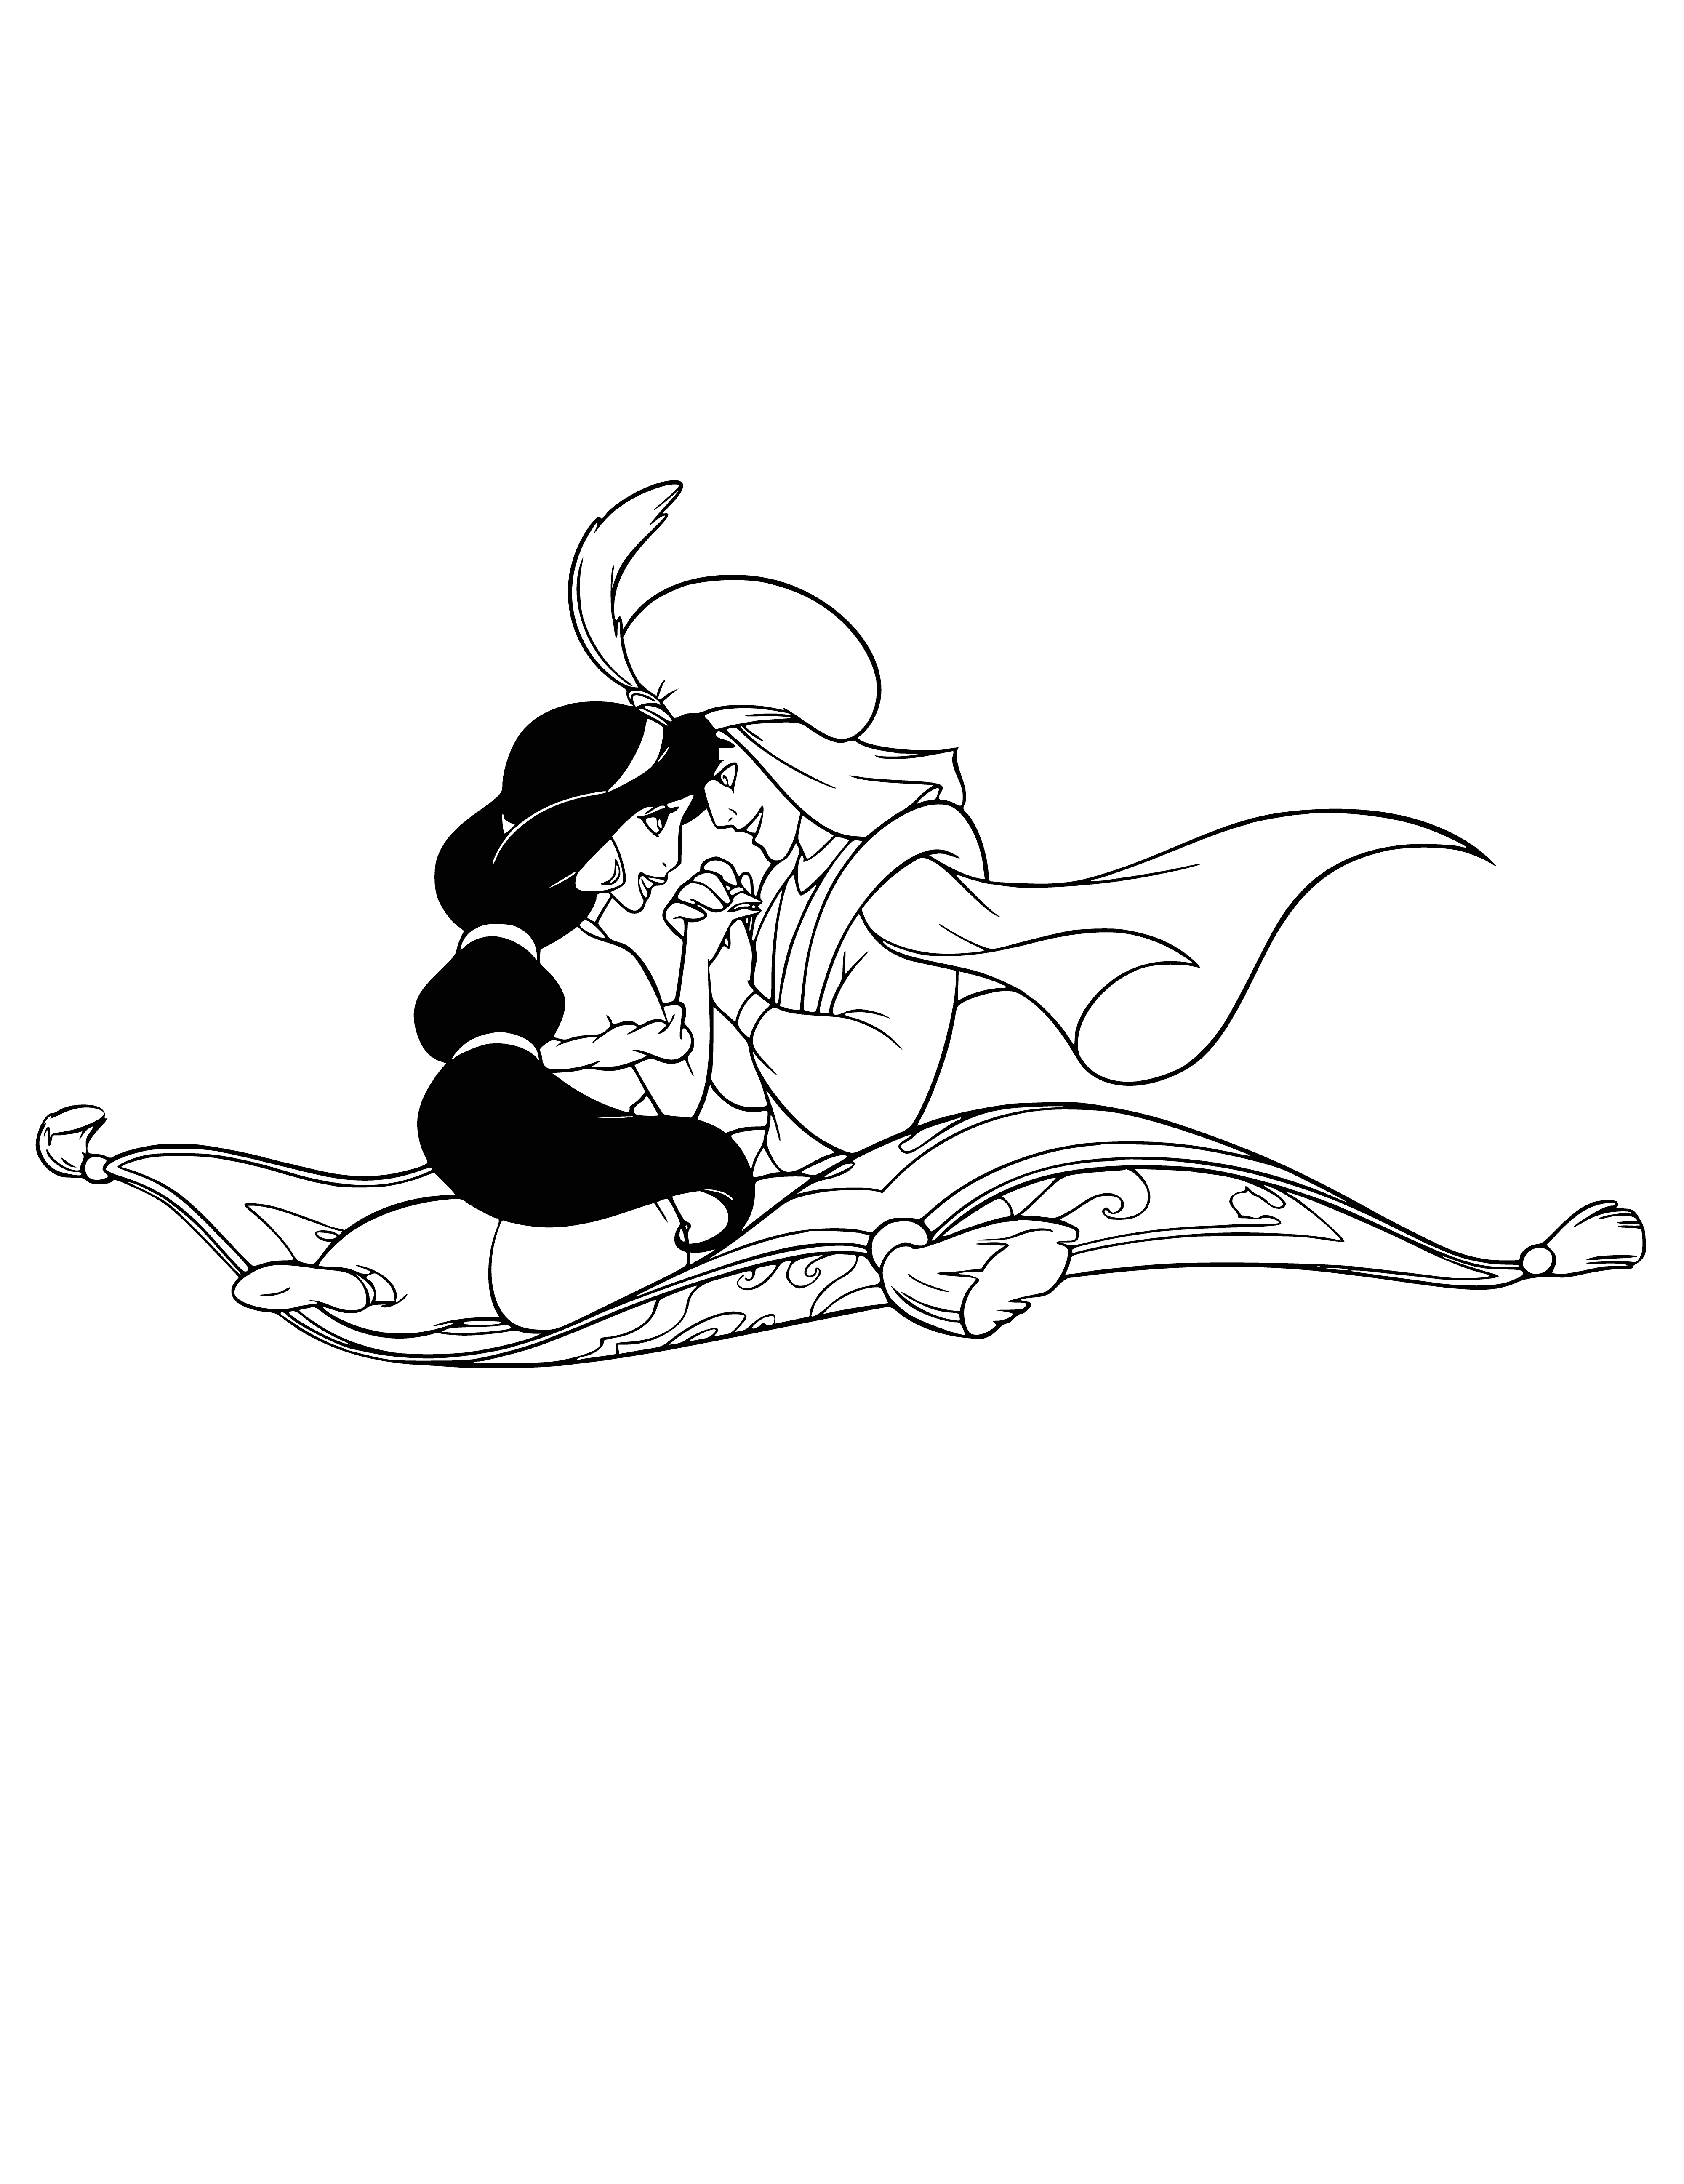 Aladdin and Jasmine on a flying carpet coloring page